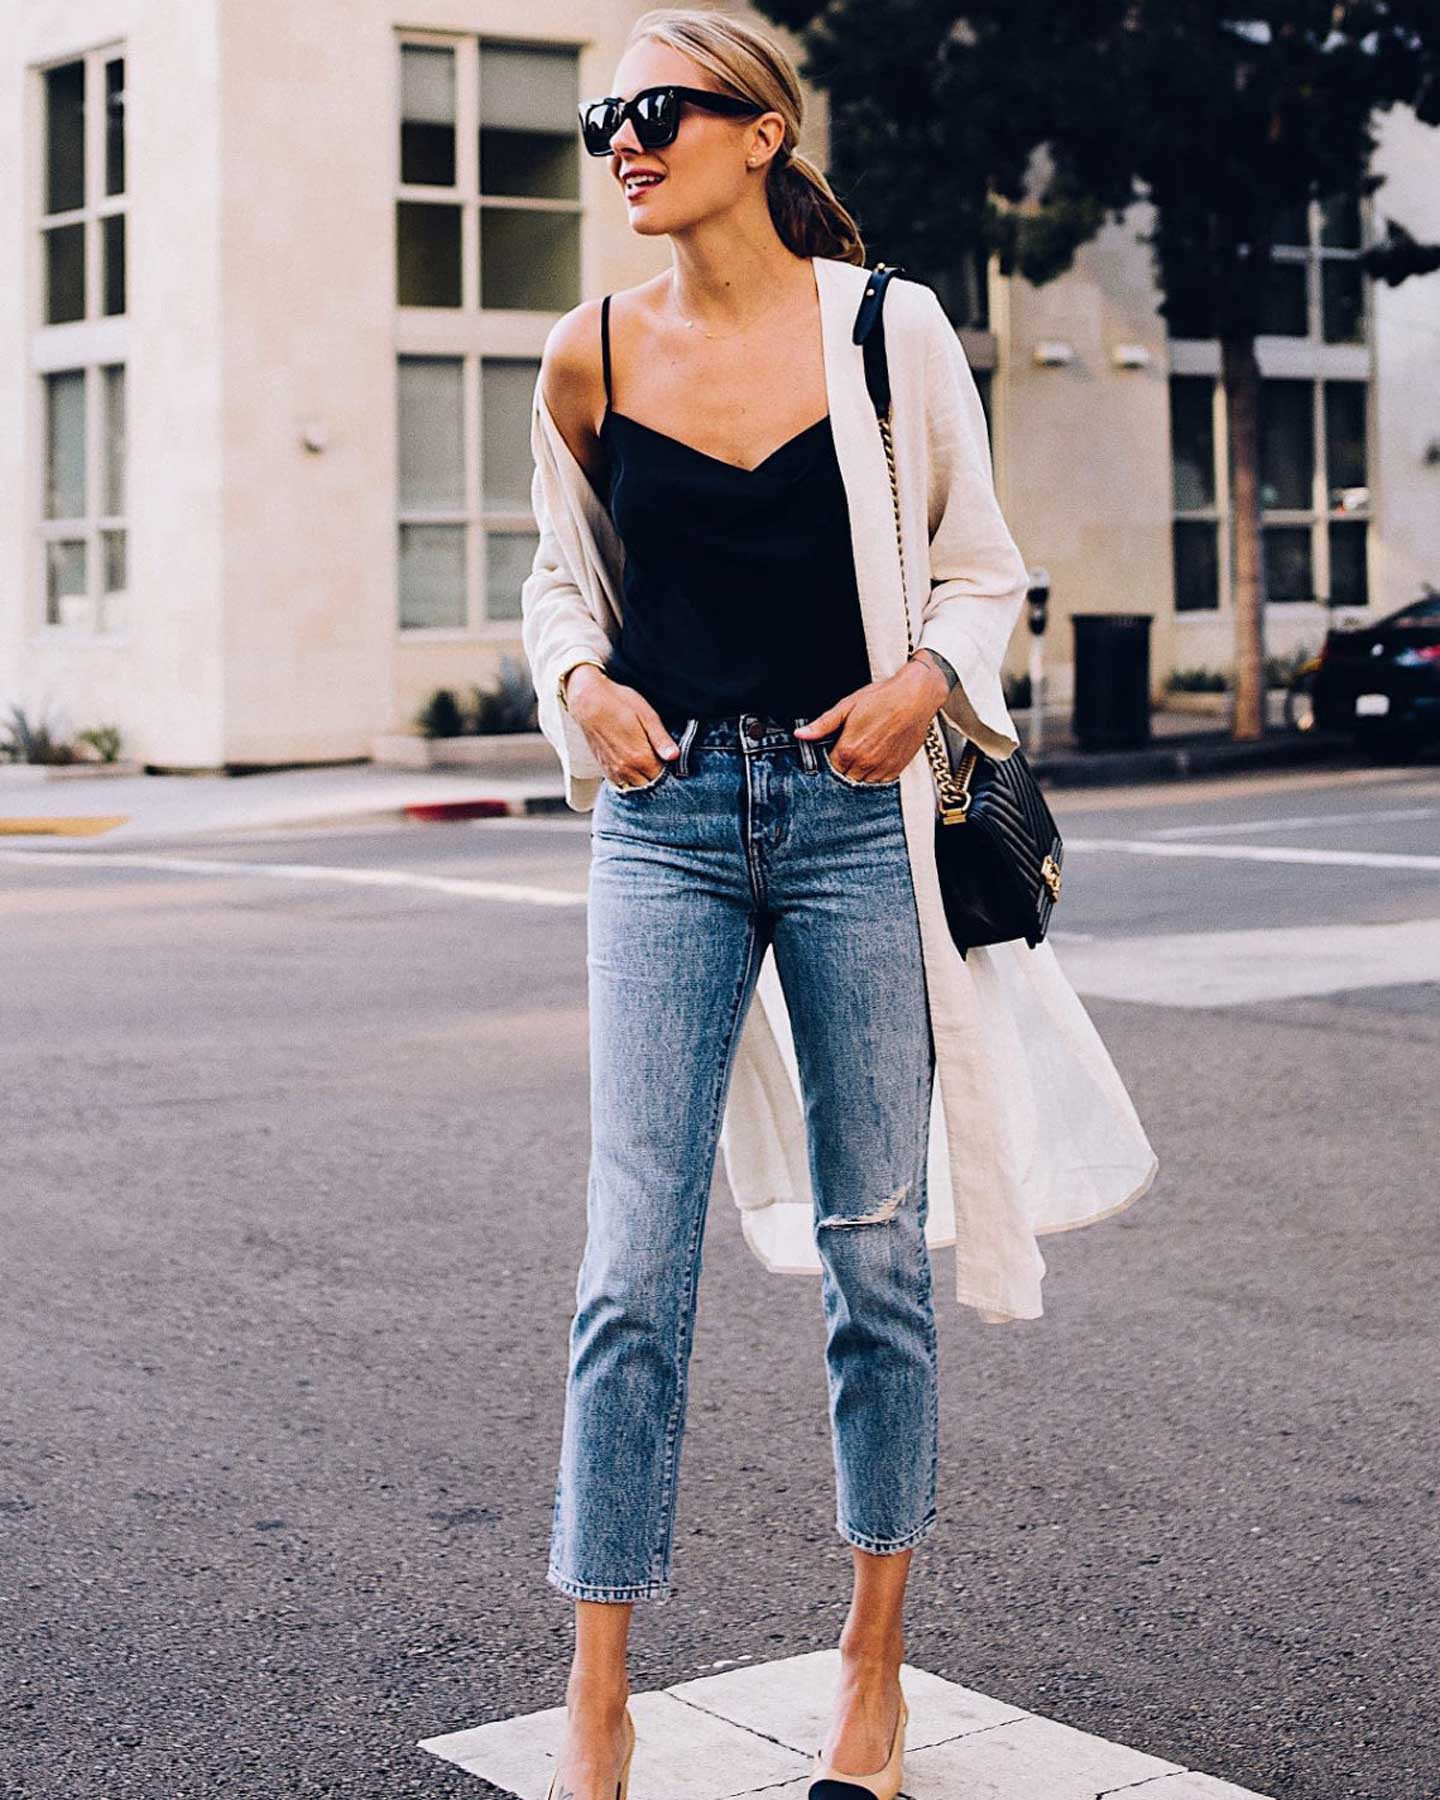 beschaving George Hanbury Voorgevoel Get the Autumn Feels with These Mom Jeans Outfit Ideas - Lookiero Blog